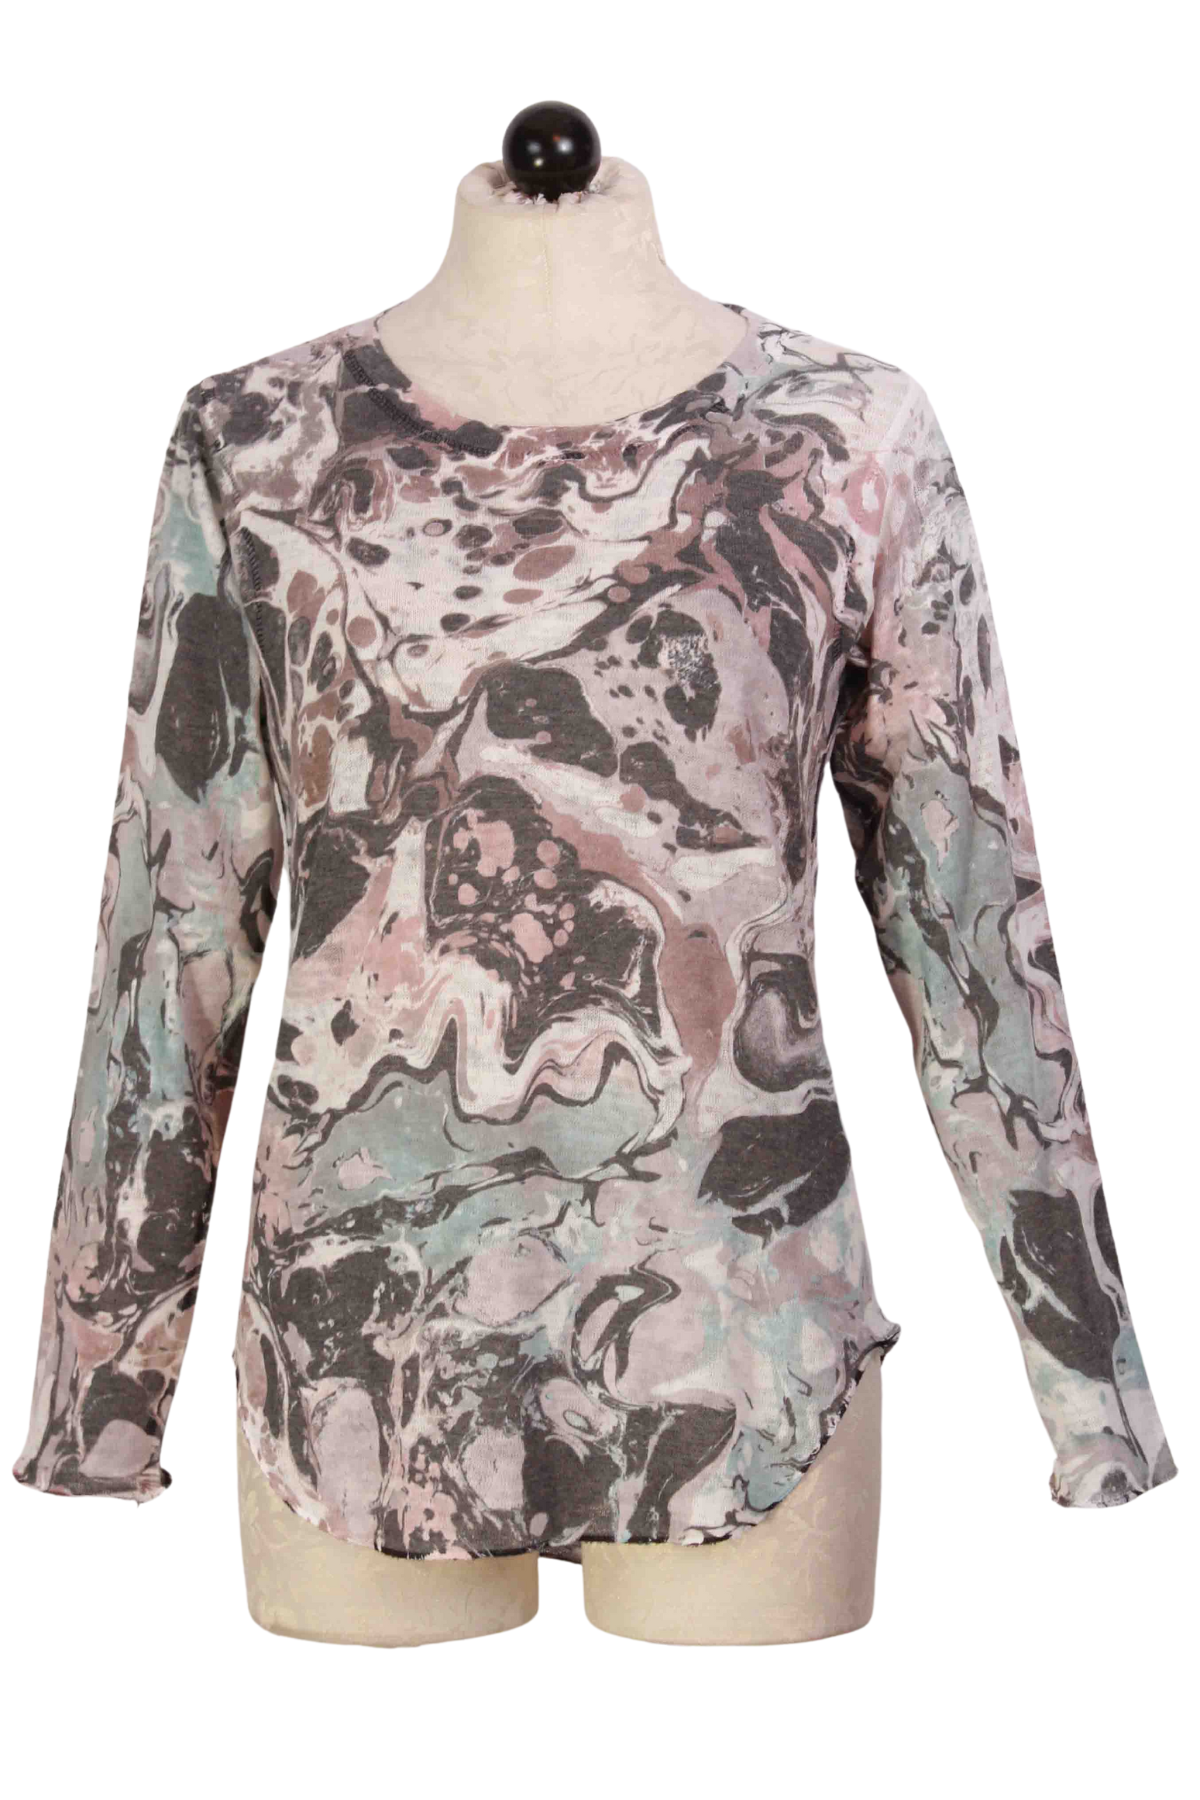 Grey Multi Marbled Long Sleeve Top by Nally and Millie